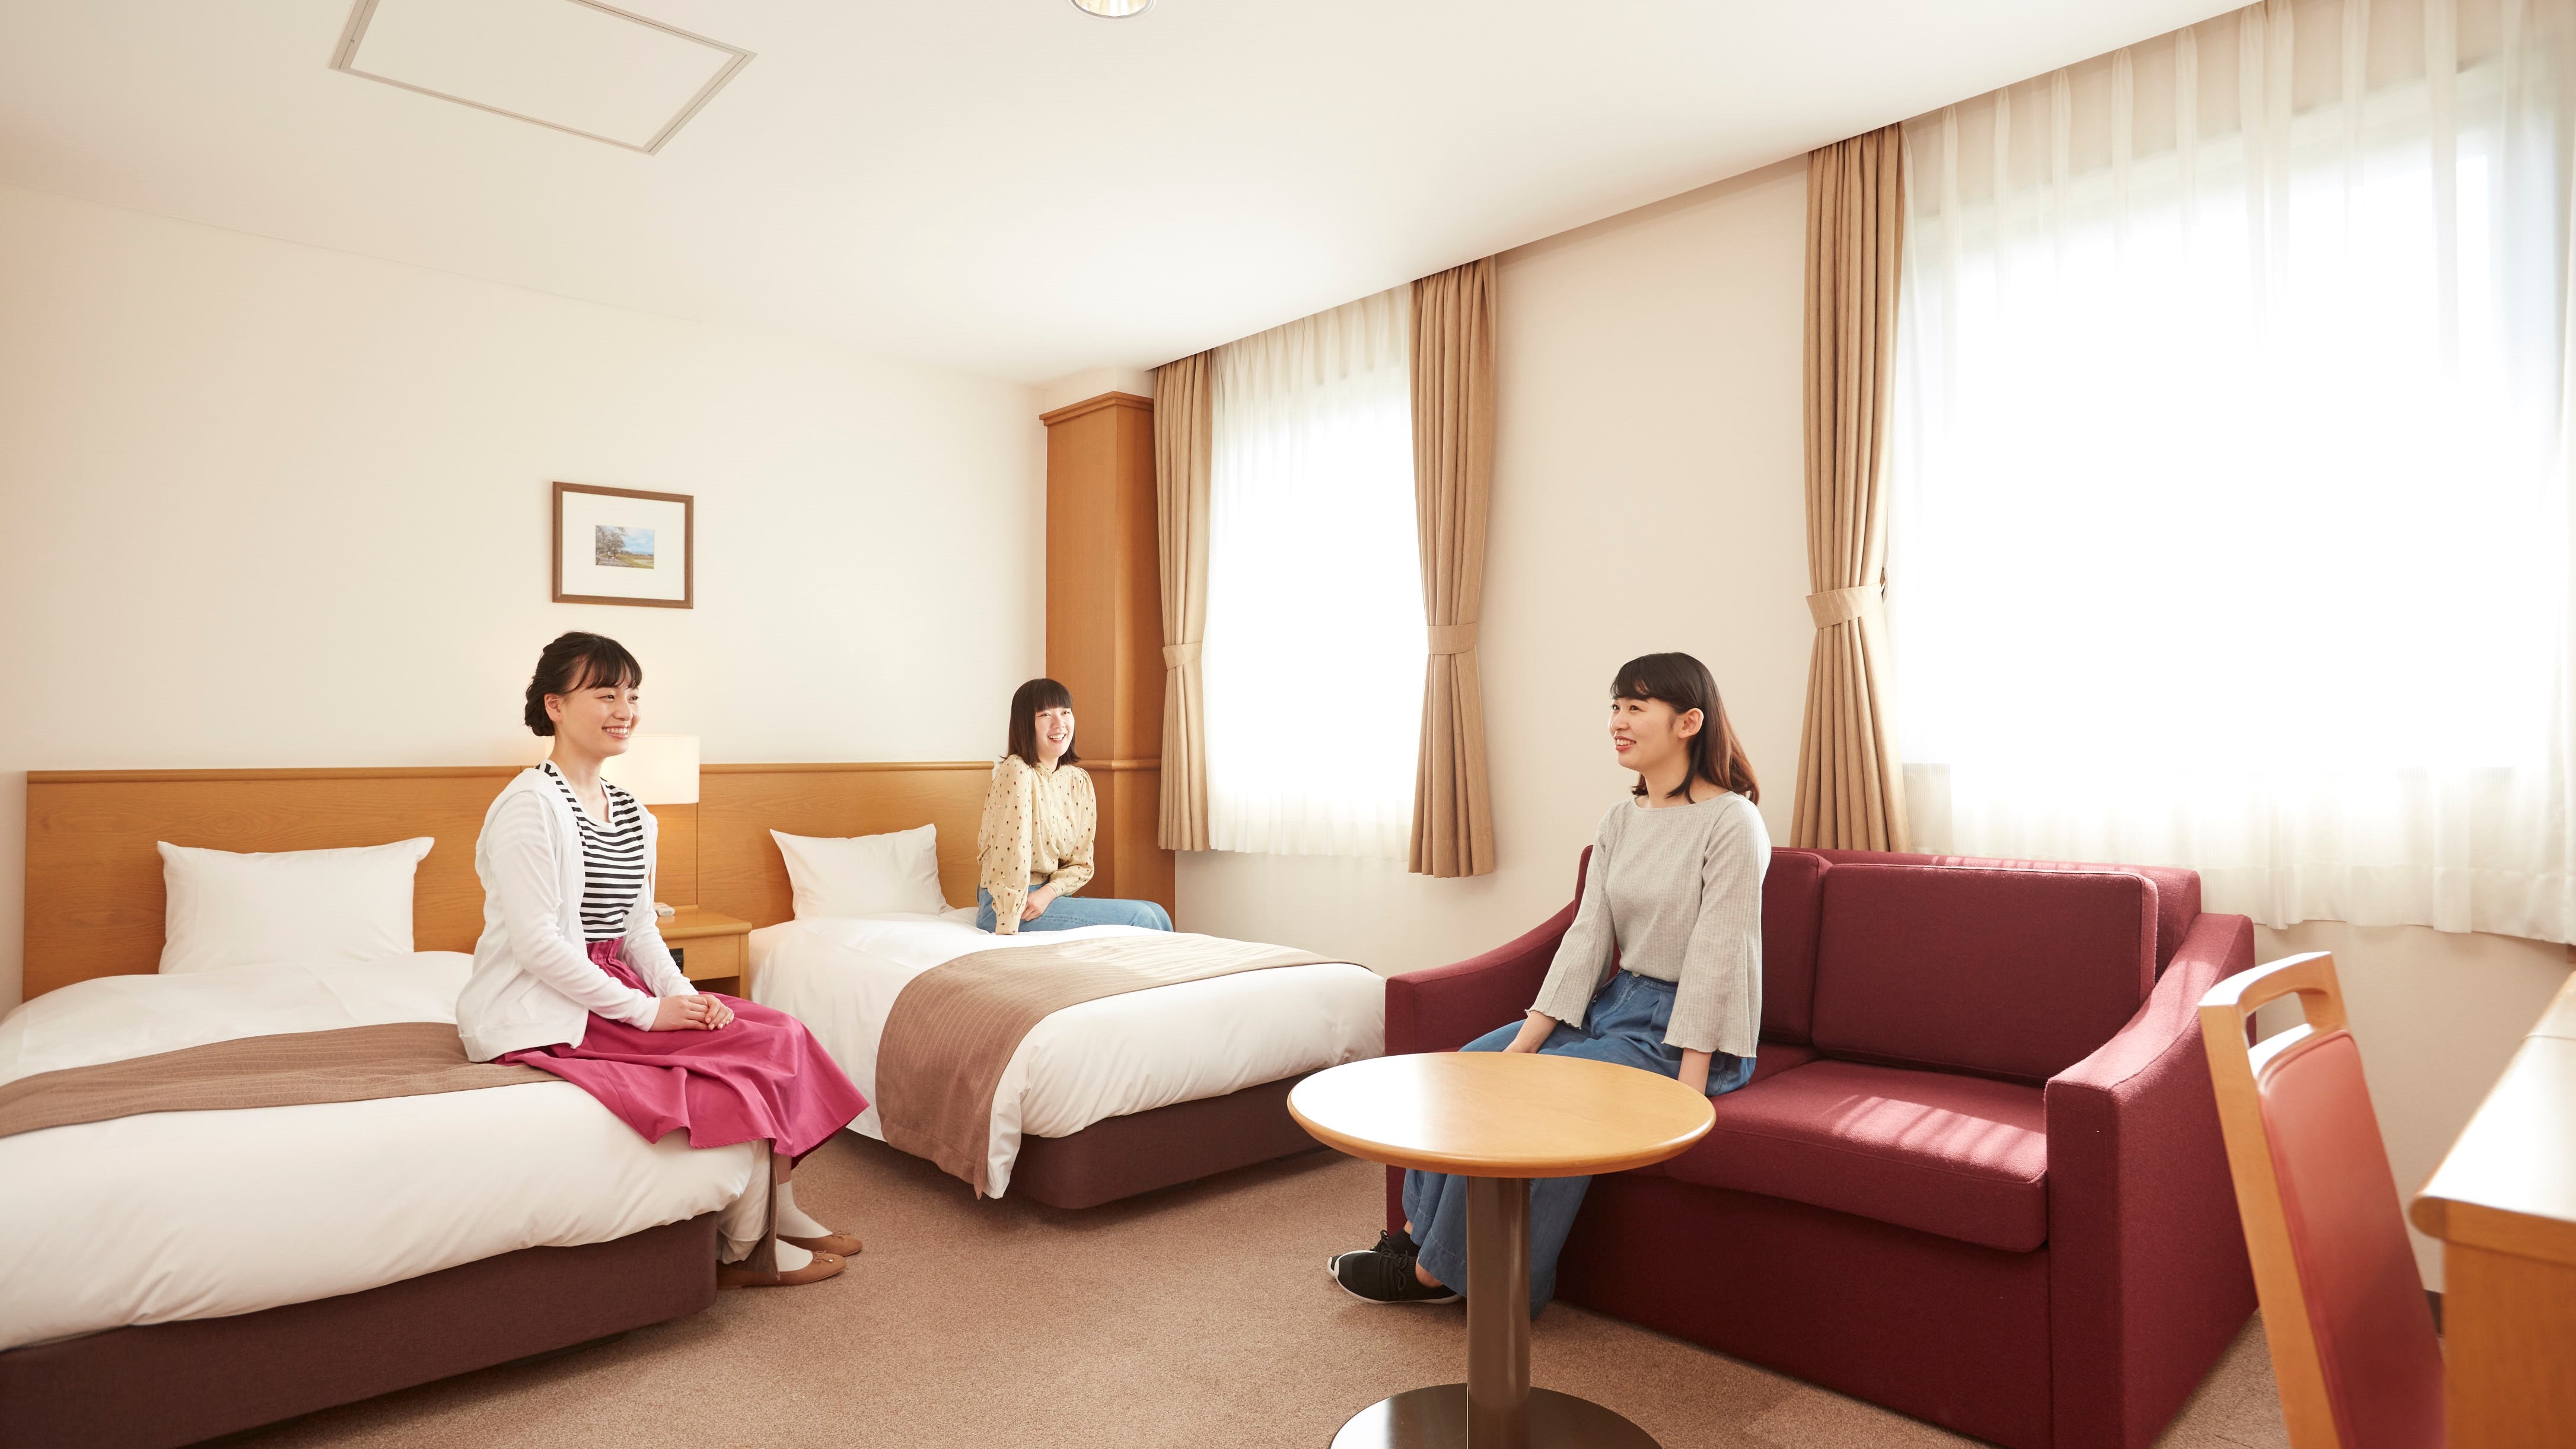 ■Guest room: DX twin room: Corner room on 1st and 2nd floor (no track side on 2nd floor)